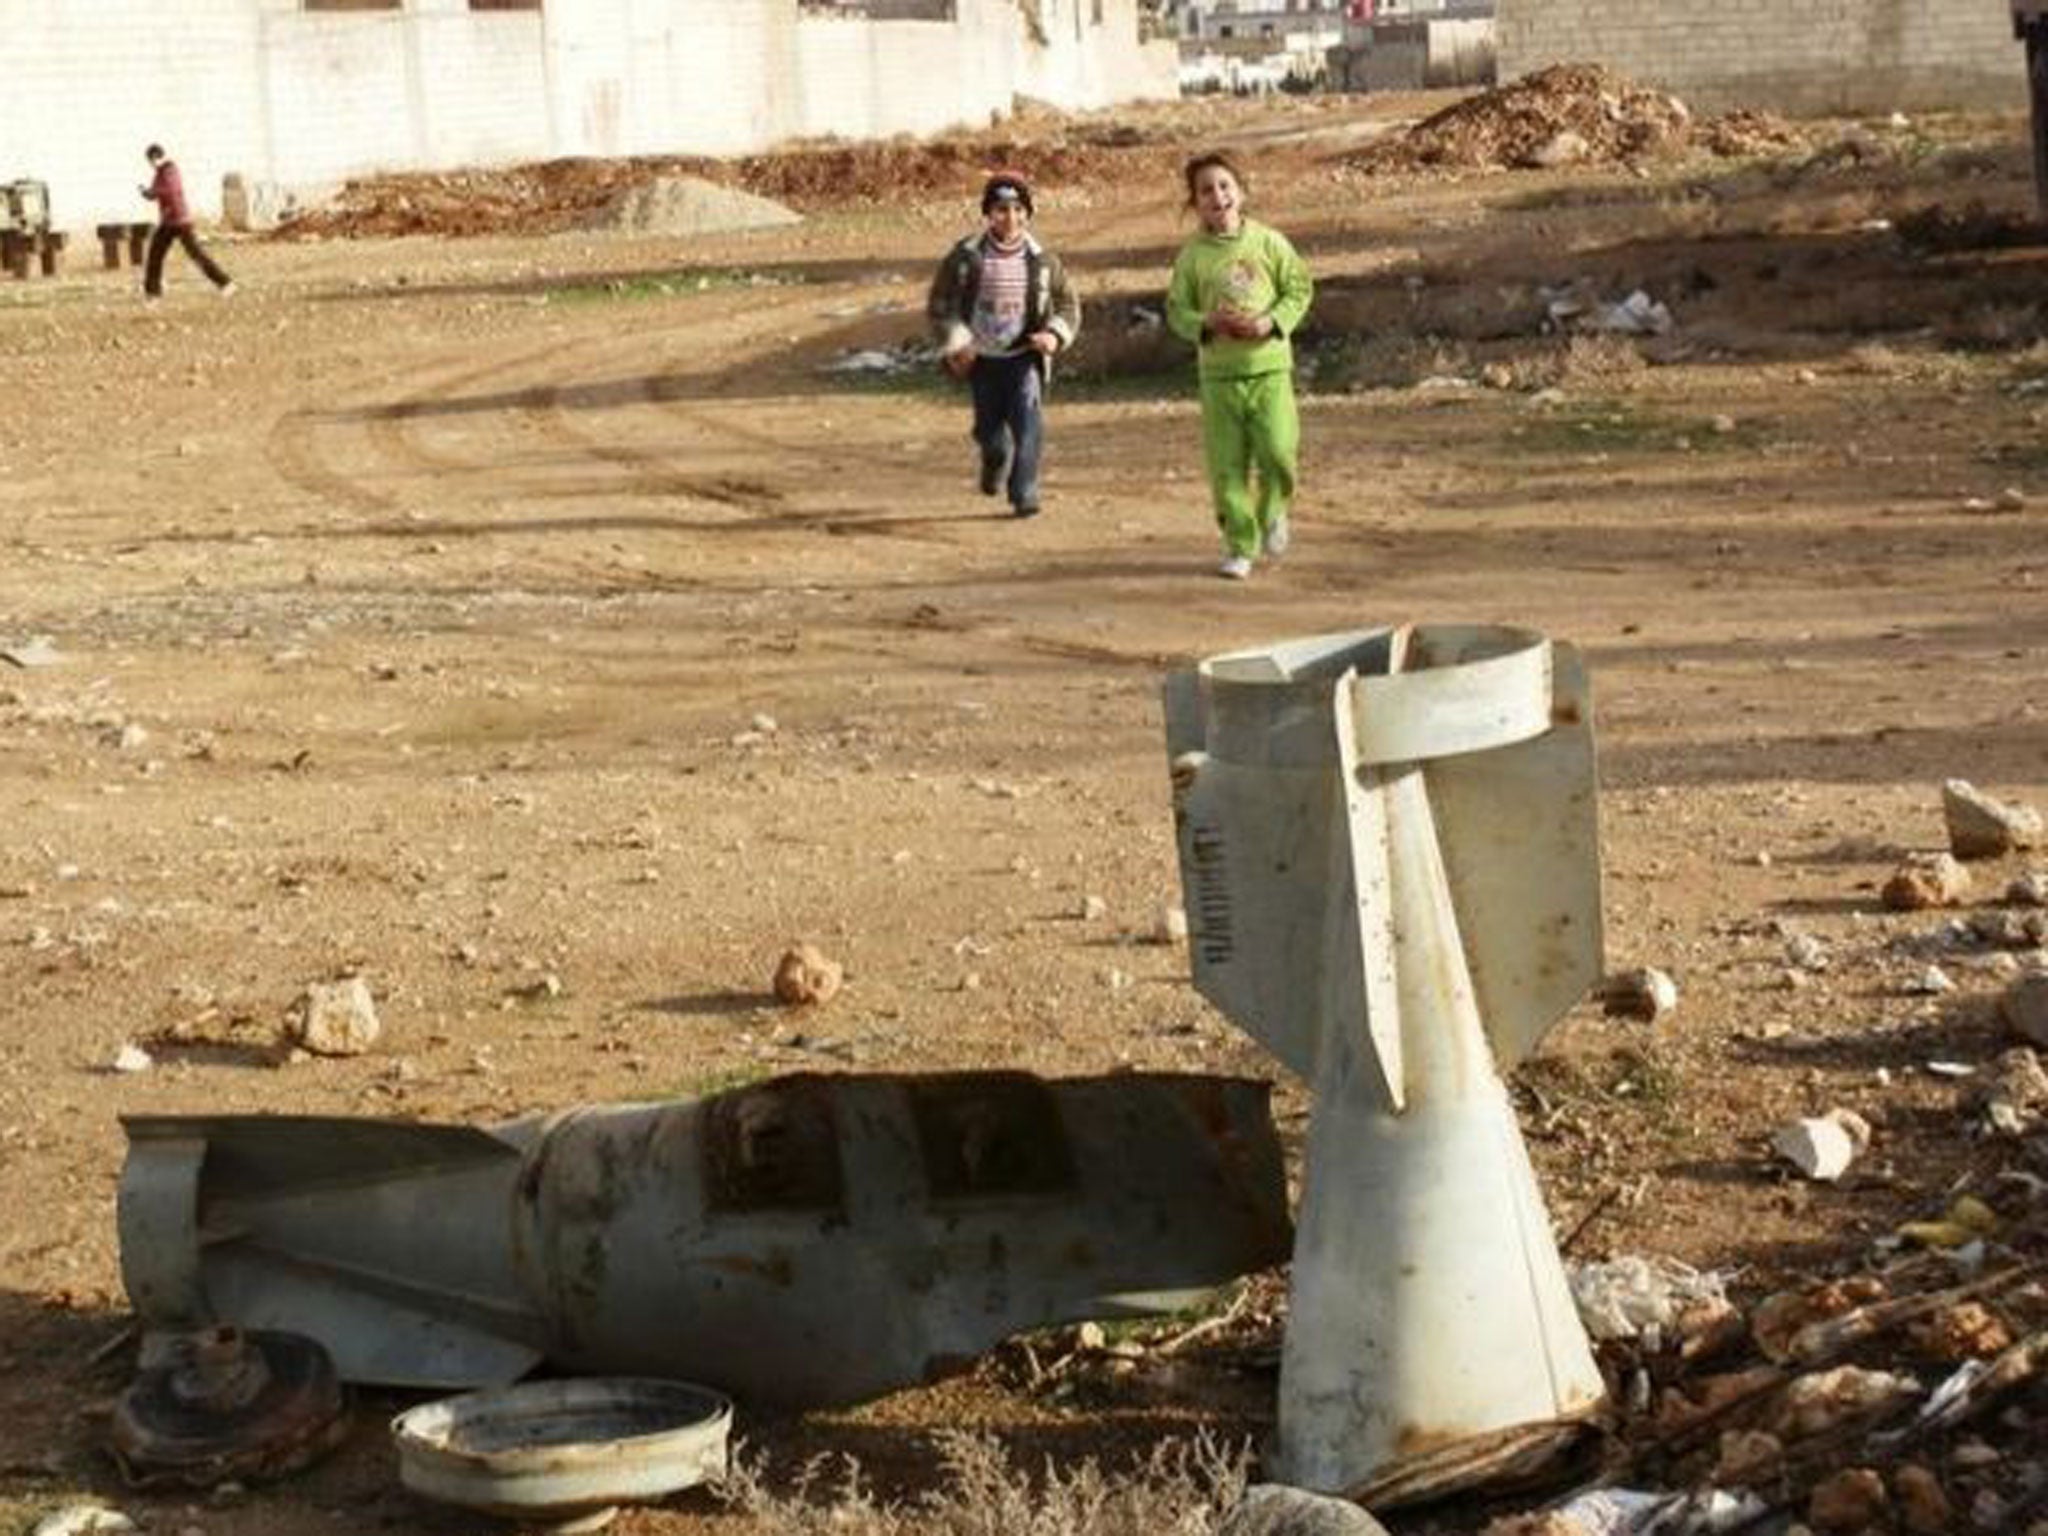 Children play near the remnants of a bomb shell in the ground, which activists said were fired by a Syrian Air Force fighter jet loyal to Syria's President Bashar al-Assad, in Daraya